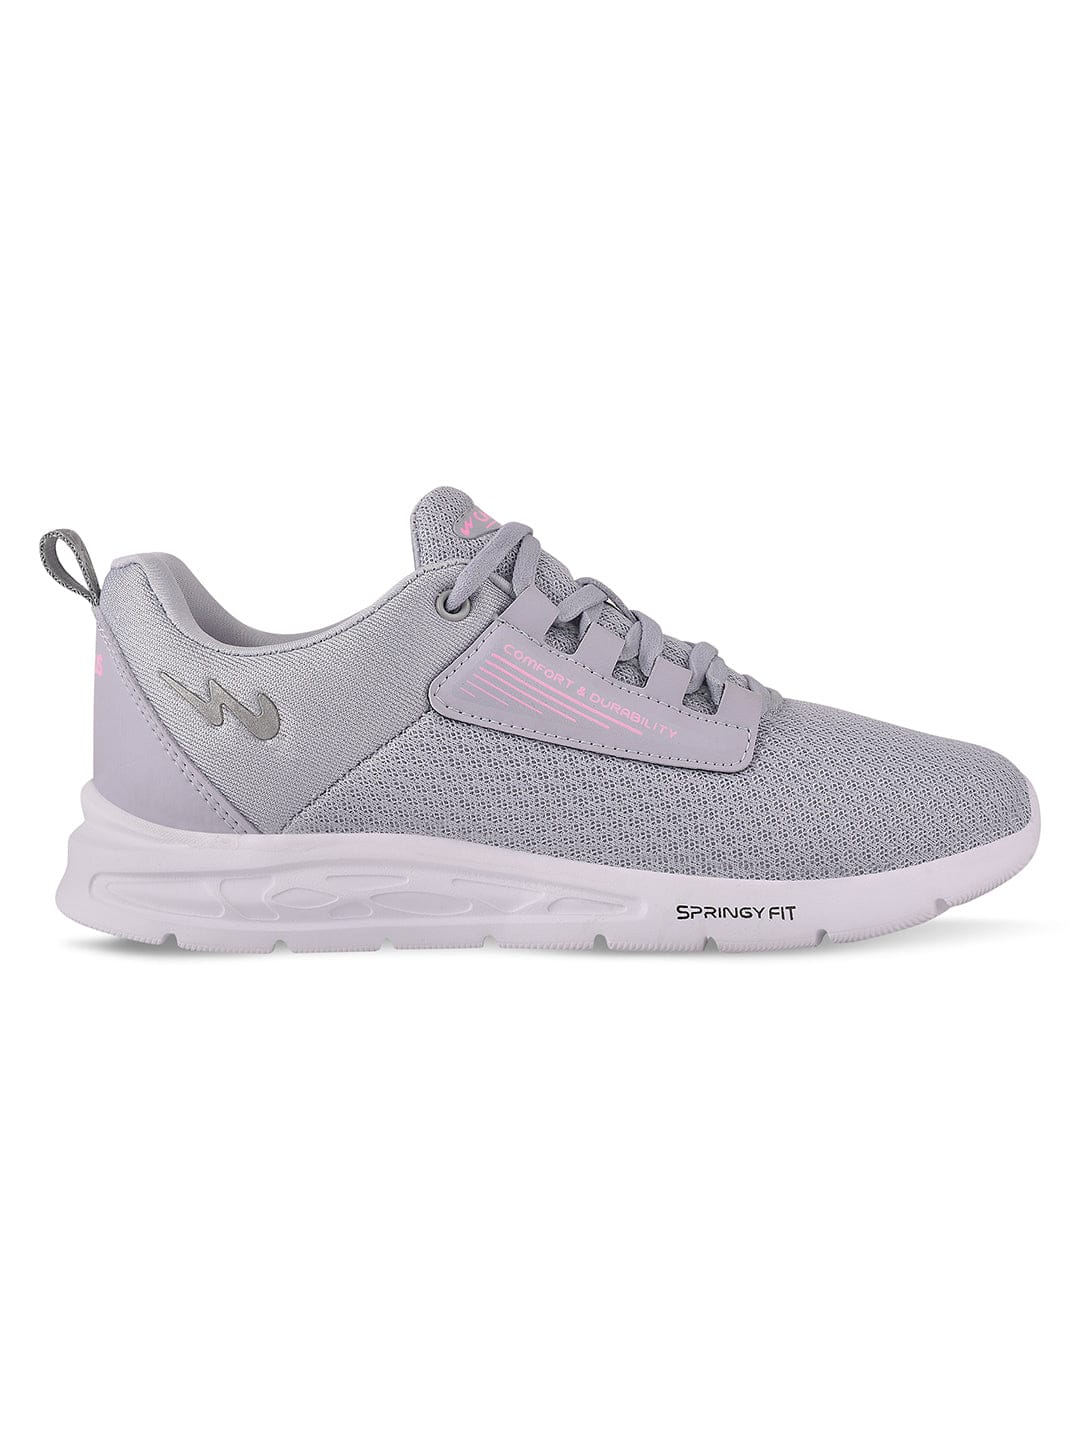 Buy Running Shoes For Women: Lyra-N-Gry-Pink